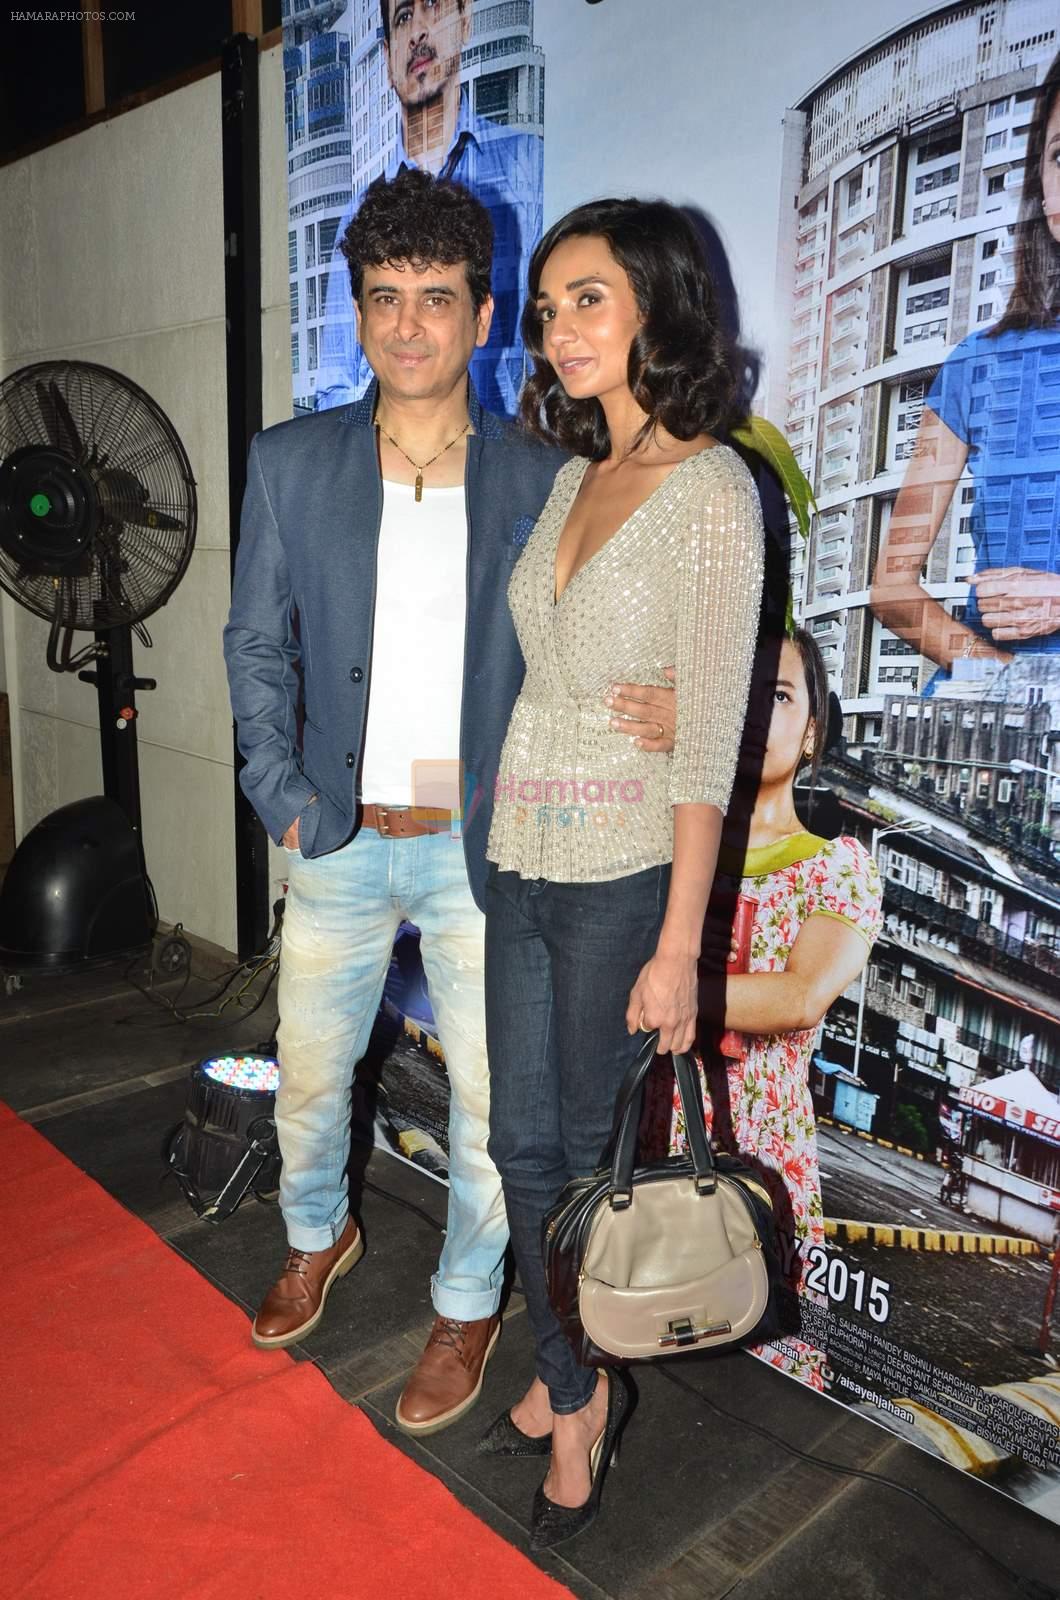 Ira Dubey at Aisa Yeh Jahaan trailor launch in Mumbai on 30th June 2015